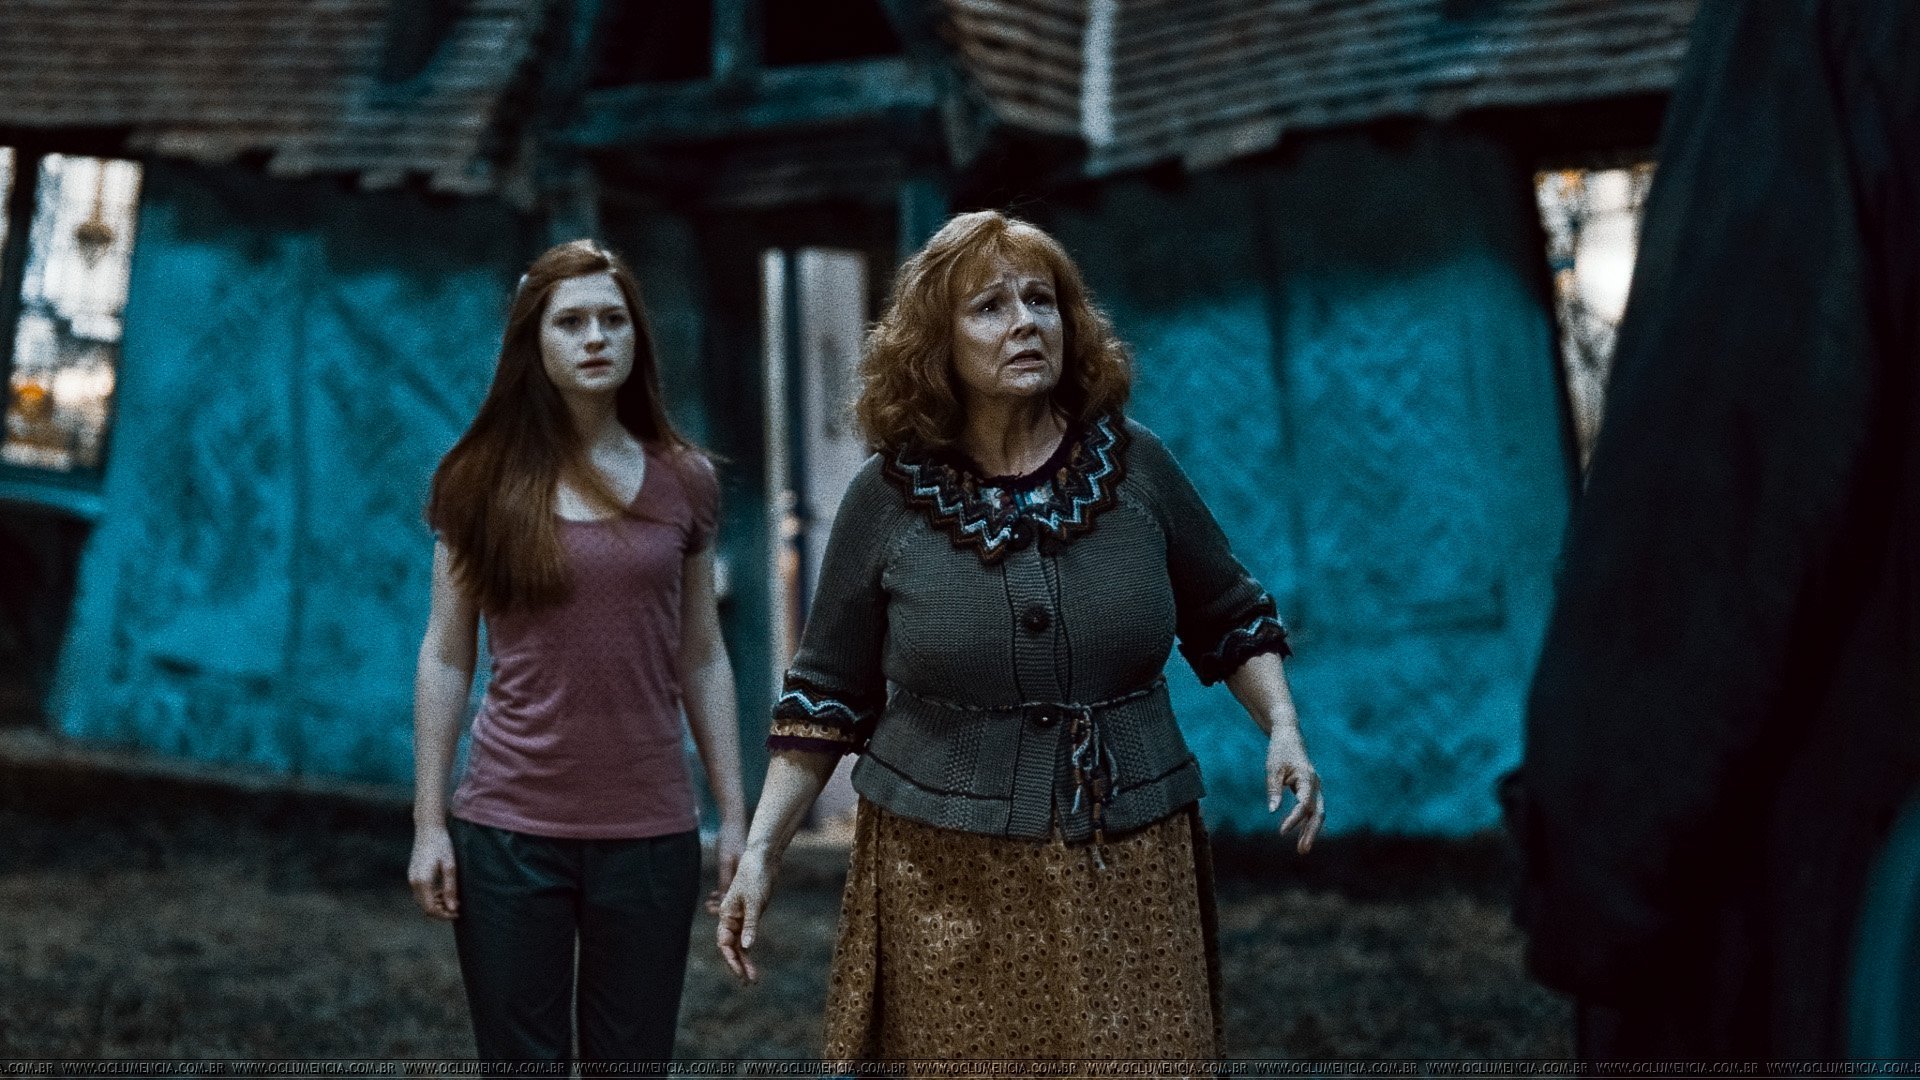 Ginny at The Burrow in HP7